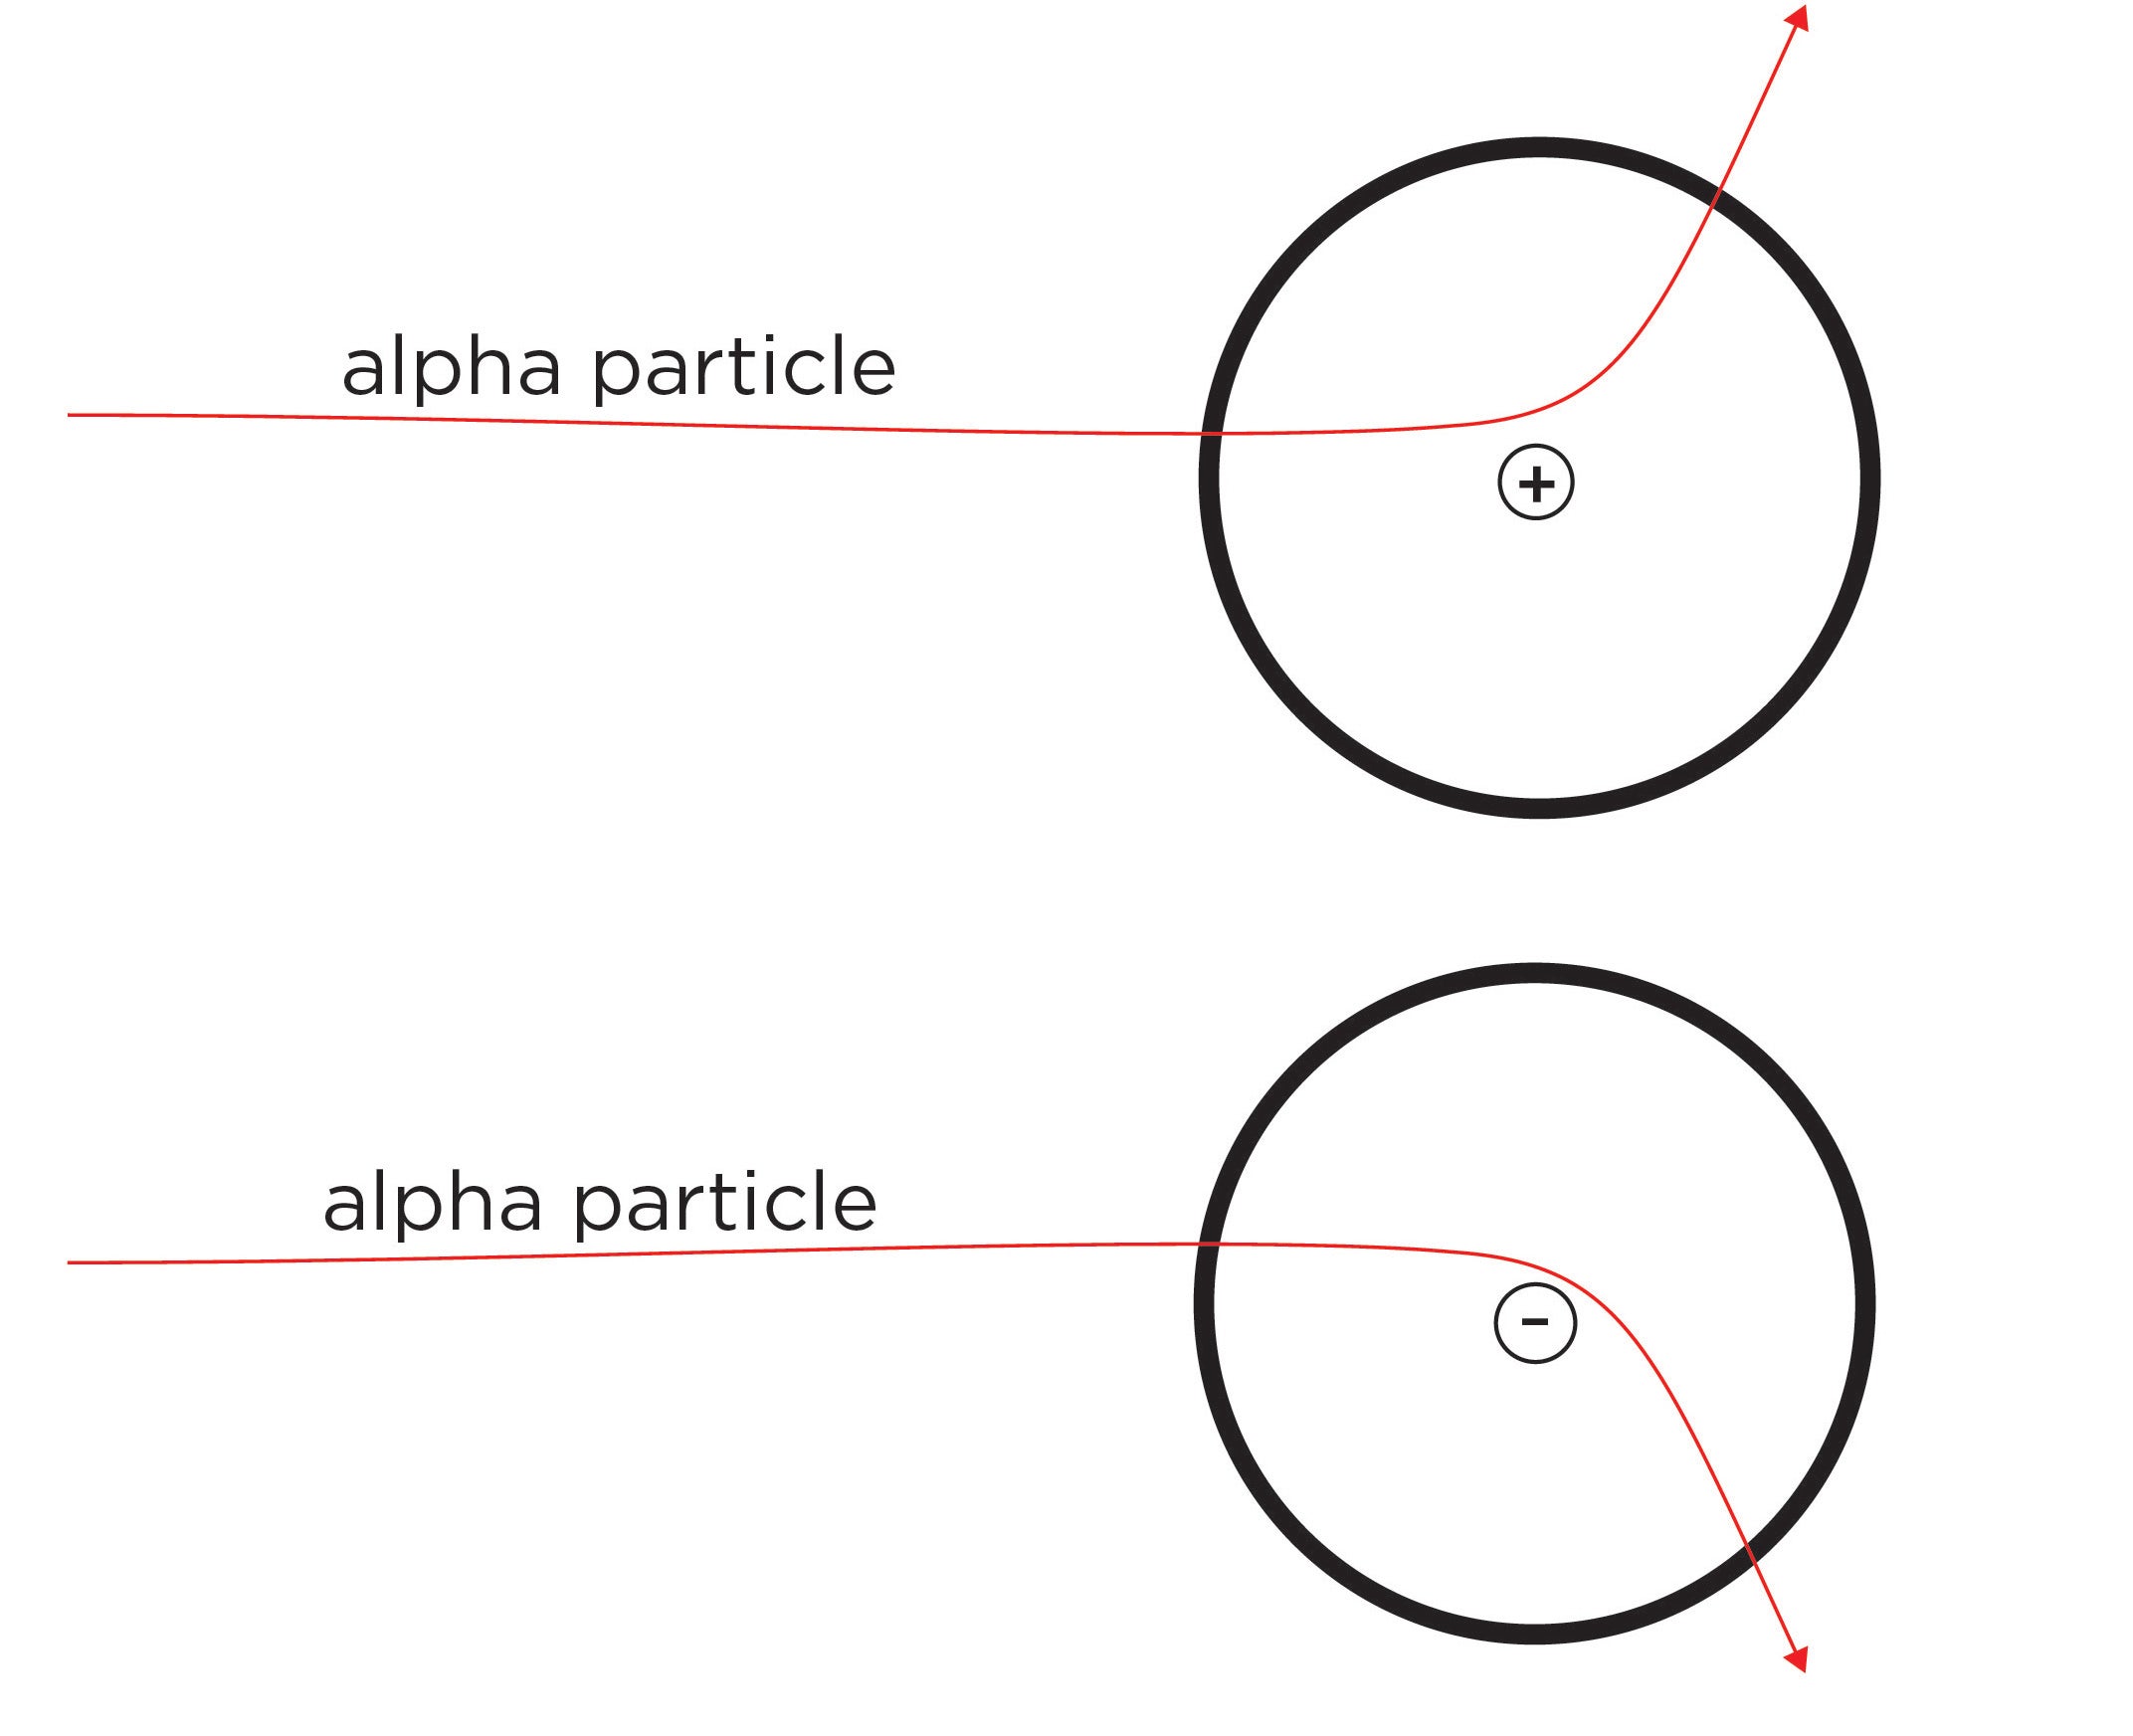 two diagrams of circular atom – one with a positively-label nucleus centre and the other with a negatively-labeled nucleus centre. There are two red arrows showing alpha particles. The one with the positive centre, the arrow deflecting upwards; the other with a negative centre has the arrow first curving around the centre and then deflecting downwards